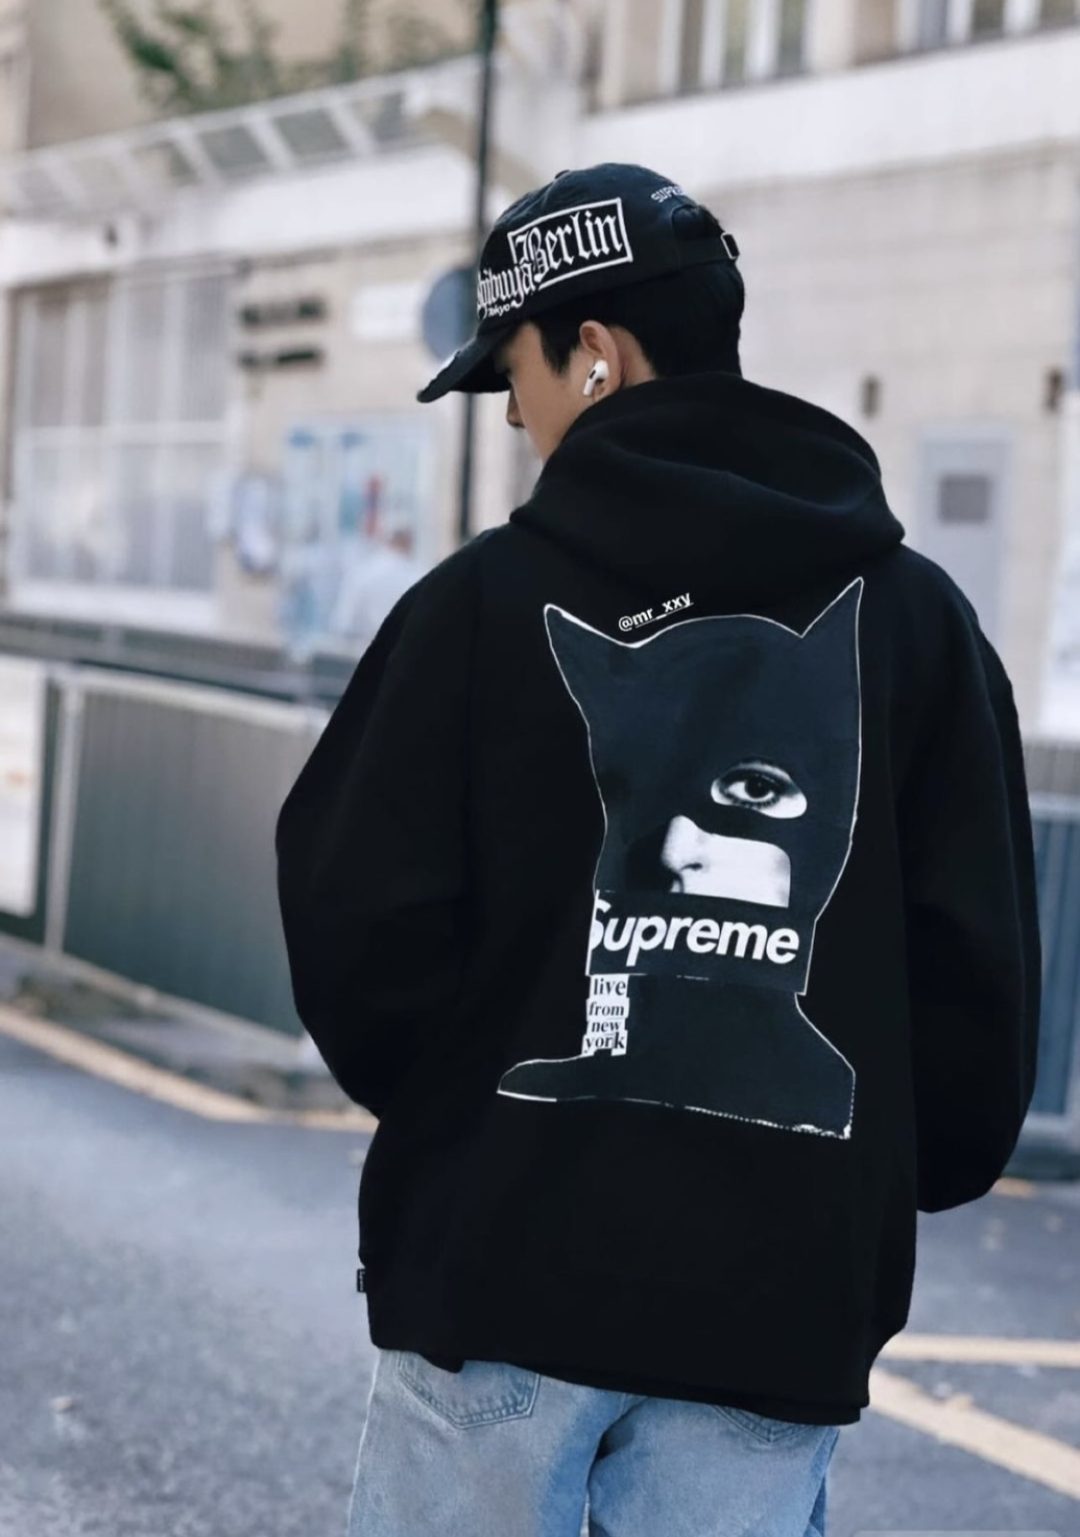 Supreme 公式通販サイトで10月21日 Week9に発売予定の23FW 23AW 新作 